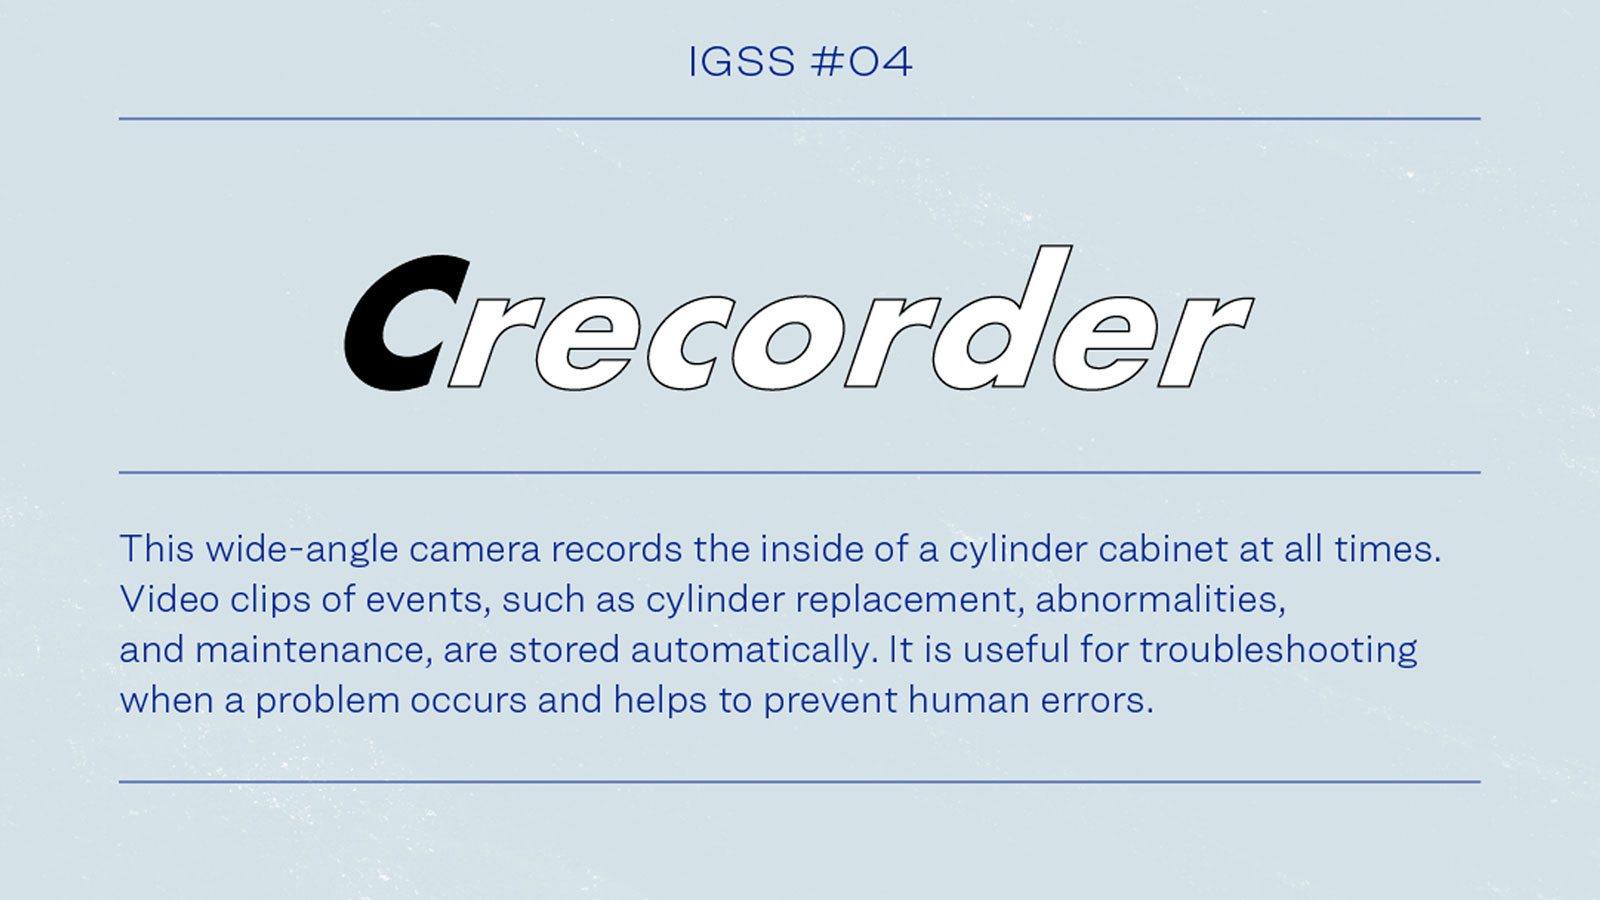 IGSS #04 Crecorder This wide-angle camera records the inside of cylinder cabinets at all times. Video clips of events, such as cylinder replacement, abnormalities, and maintenance, are stored automatically. It is useful for troubleshooting when a problem occurs and helps to prevent human errors.